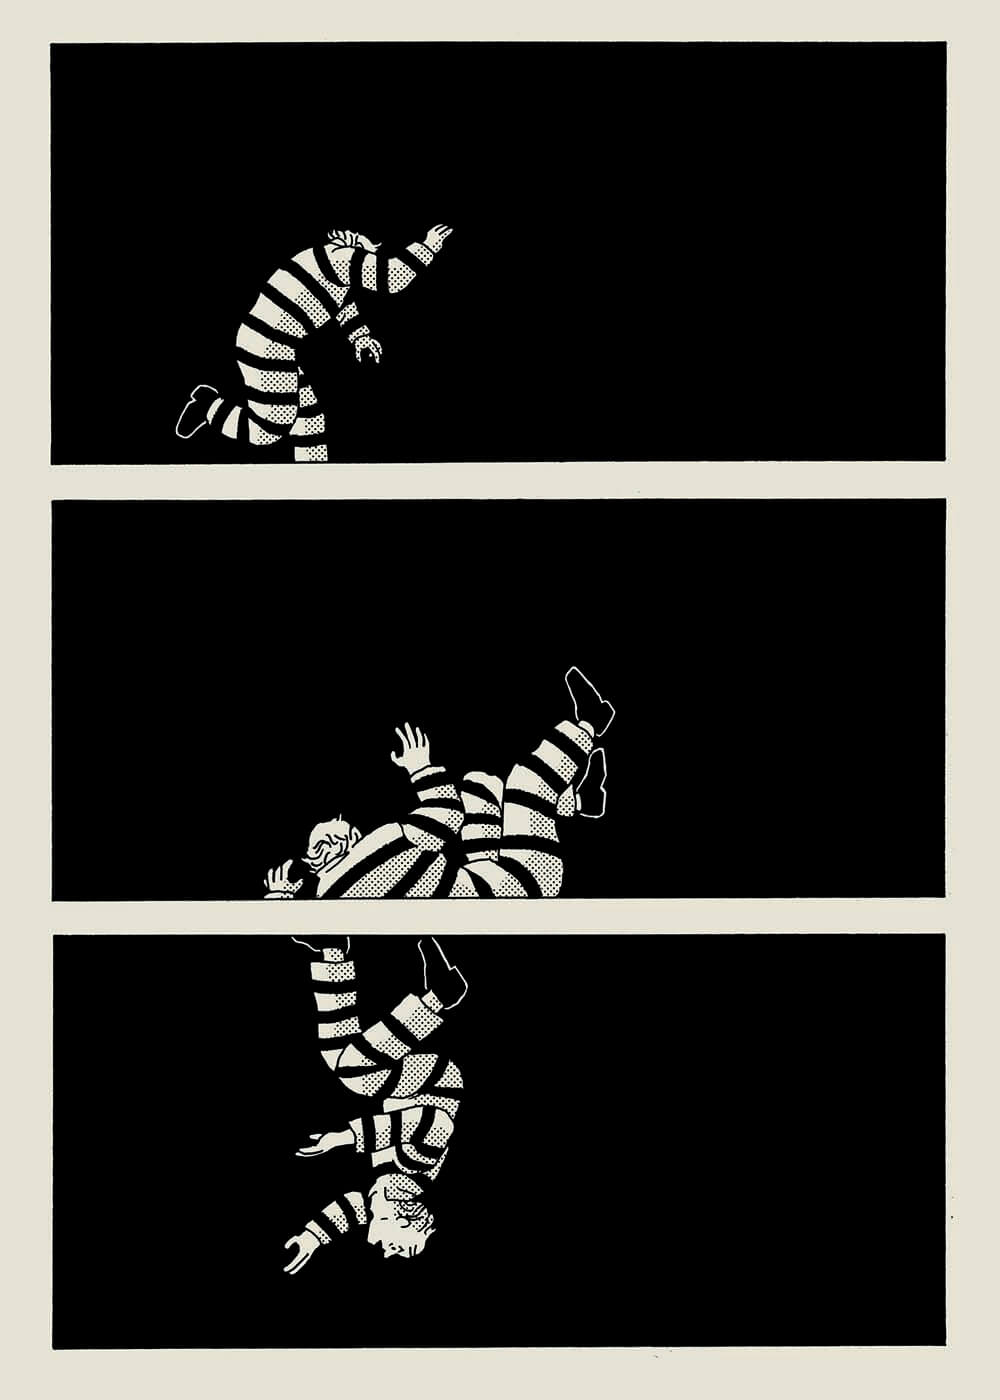 Three horizontal panels show a black and white illustration of a man in striped prisoner outfit falling on black background.